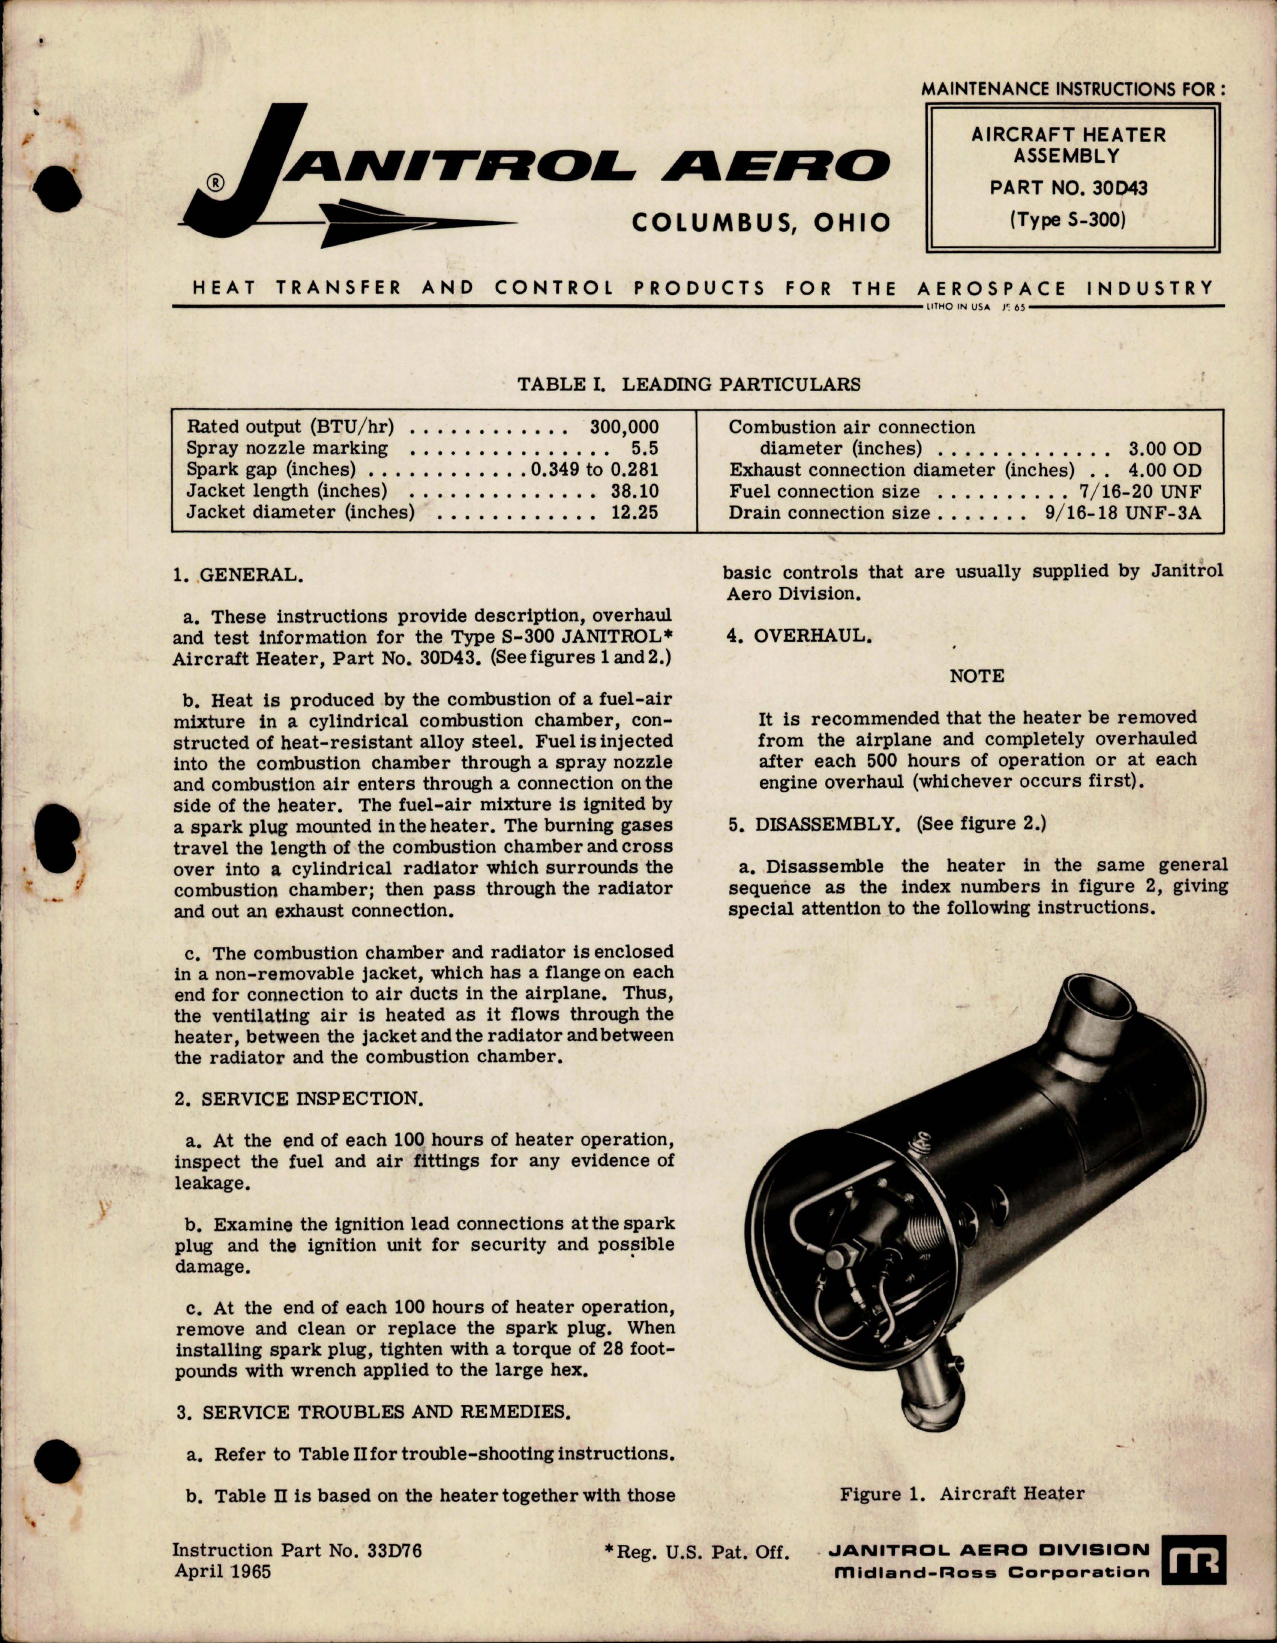 Sample page 1 from AirCorps Library document: Maintenance Instructions for Aircraft Heaters Assembly Type S-300 - Part 30D43 